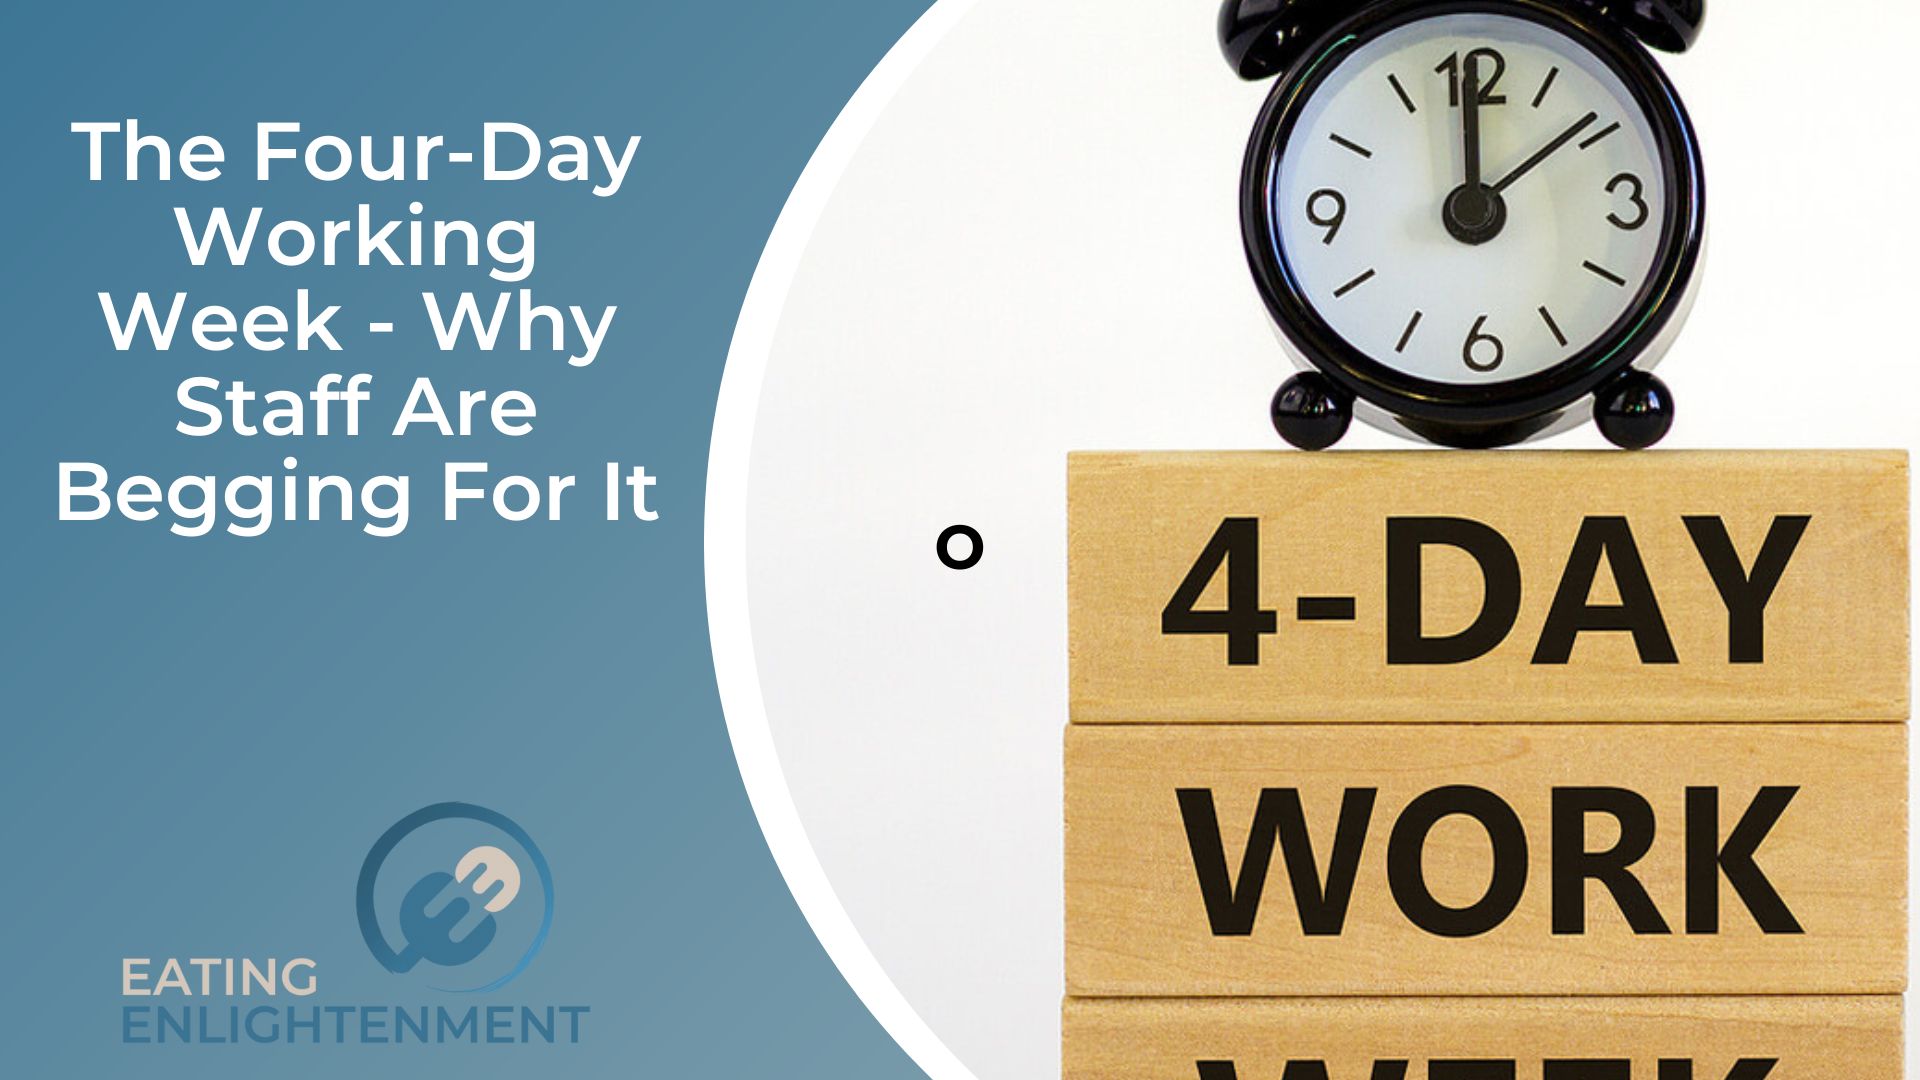 The Four-Day Working Week - Why Staff Are Begging For It